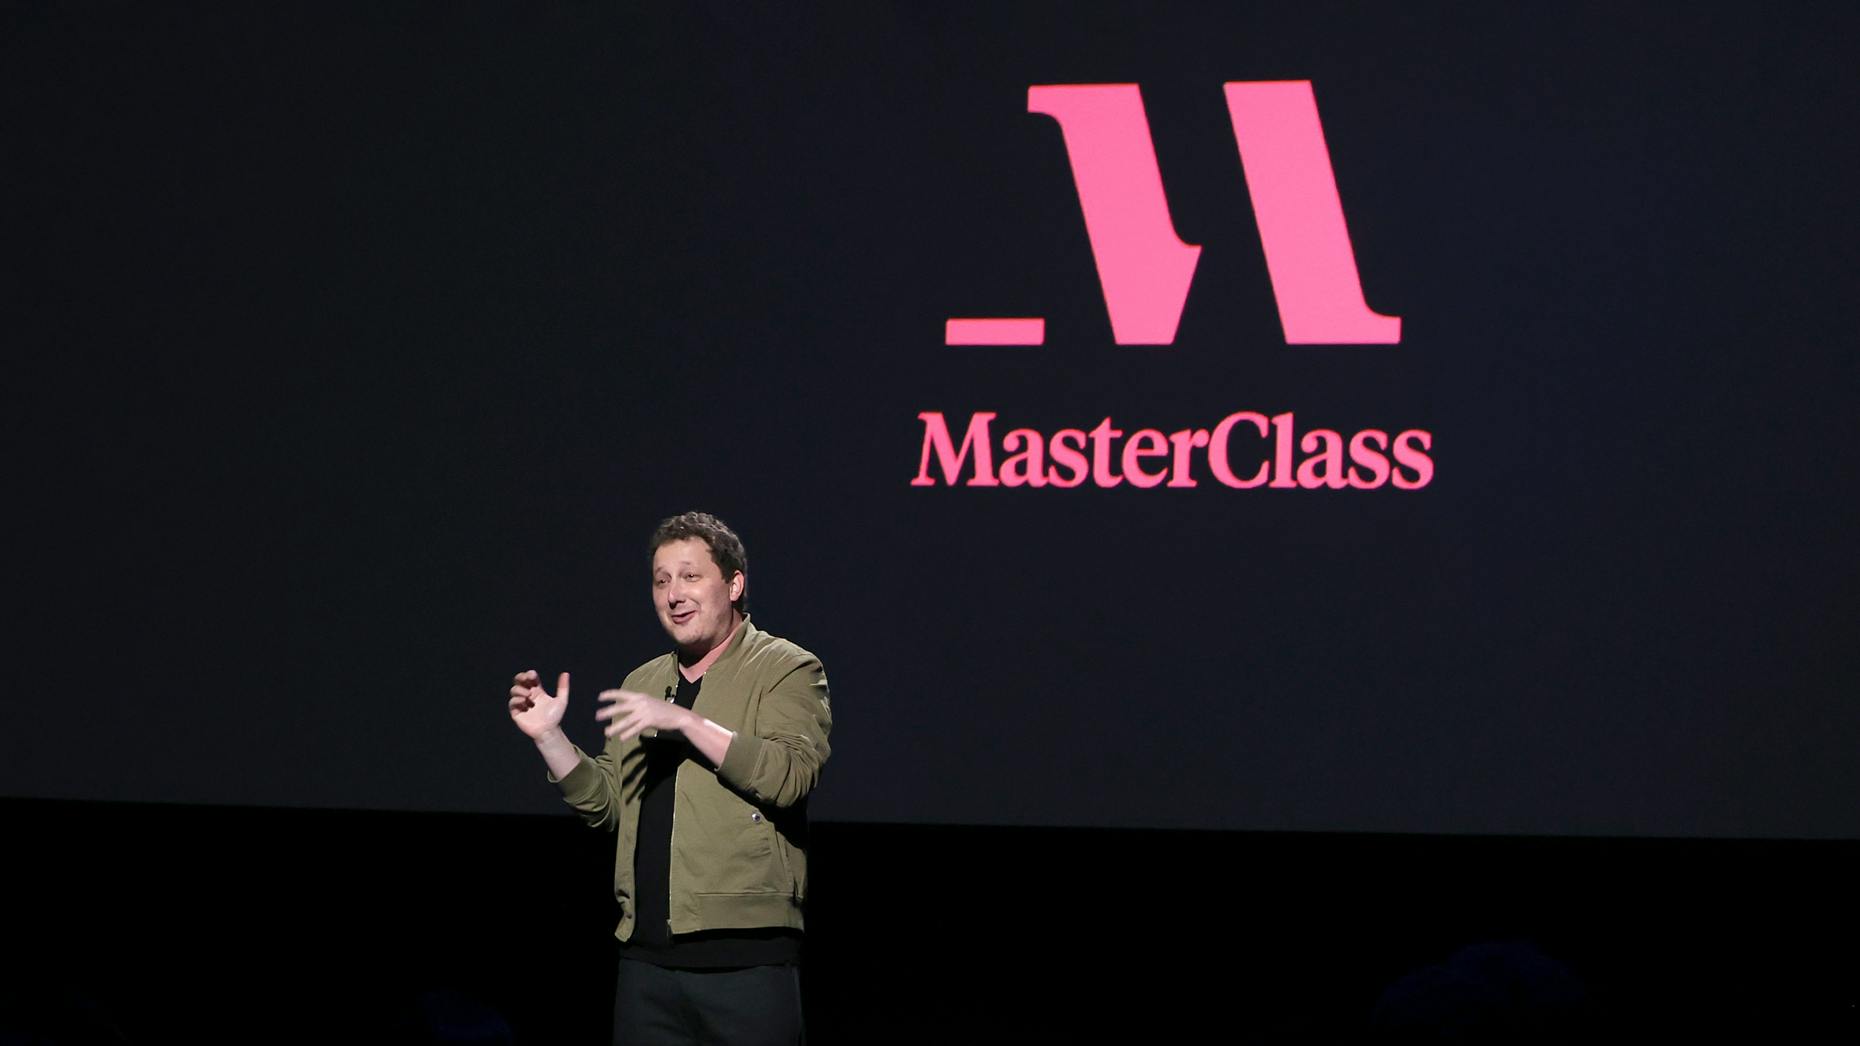 MasterClass more than triples valuation in one year, master class